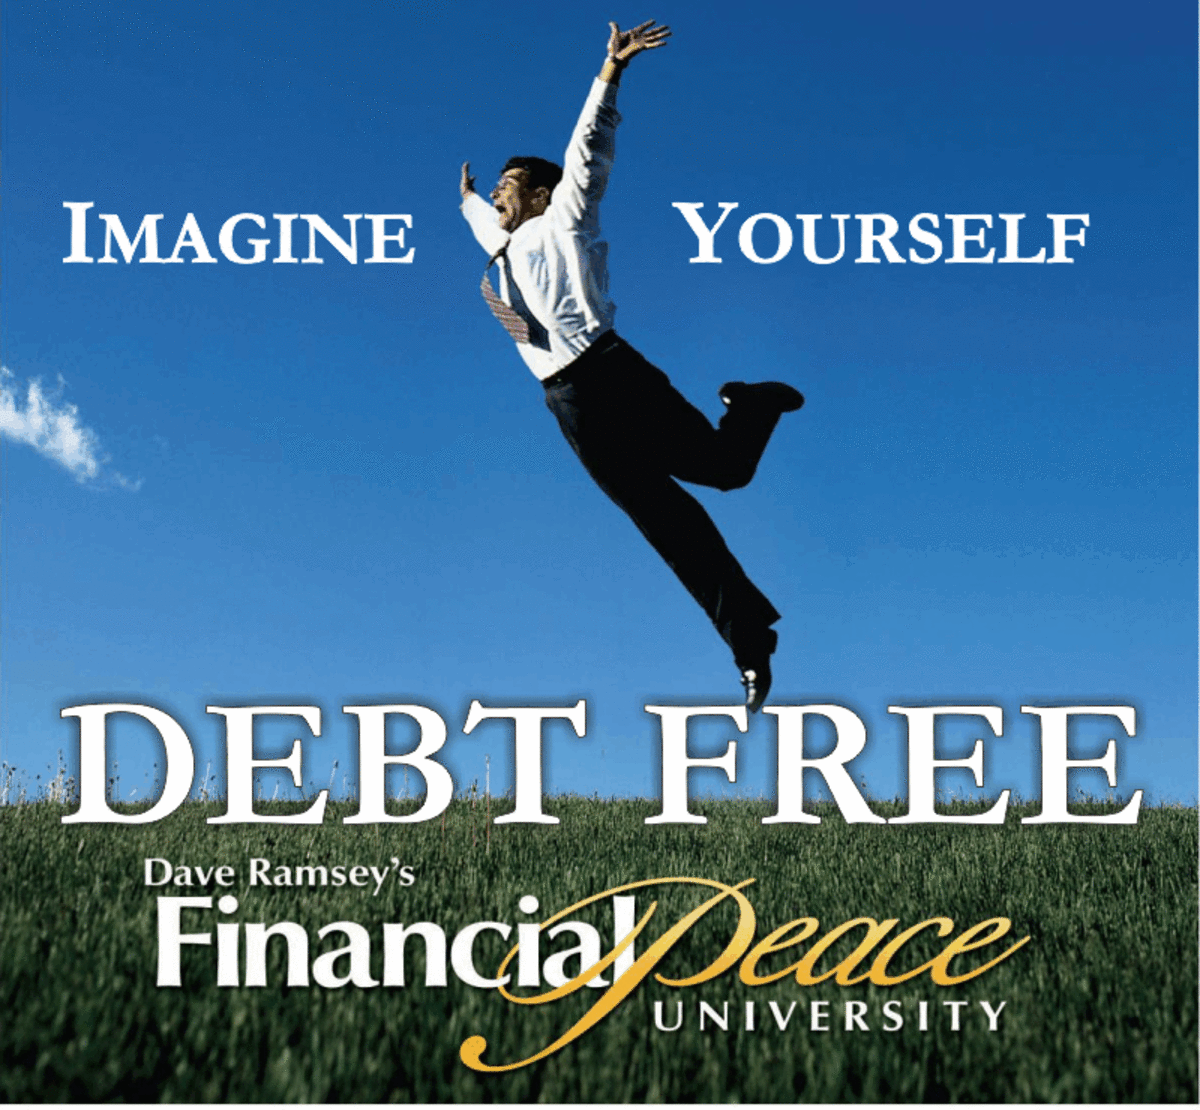 Dave's main message is: Get out of debt.